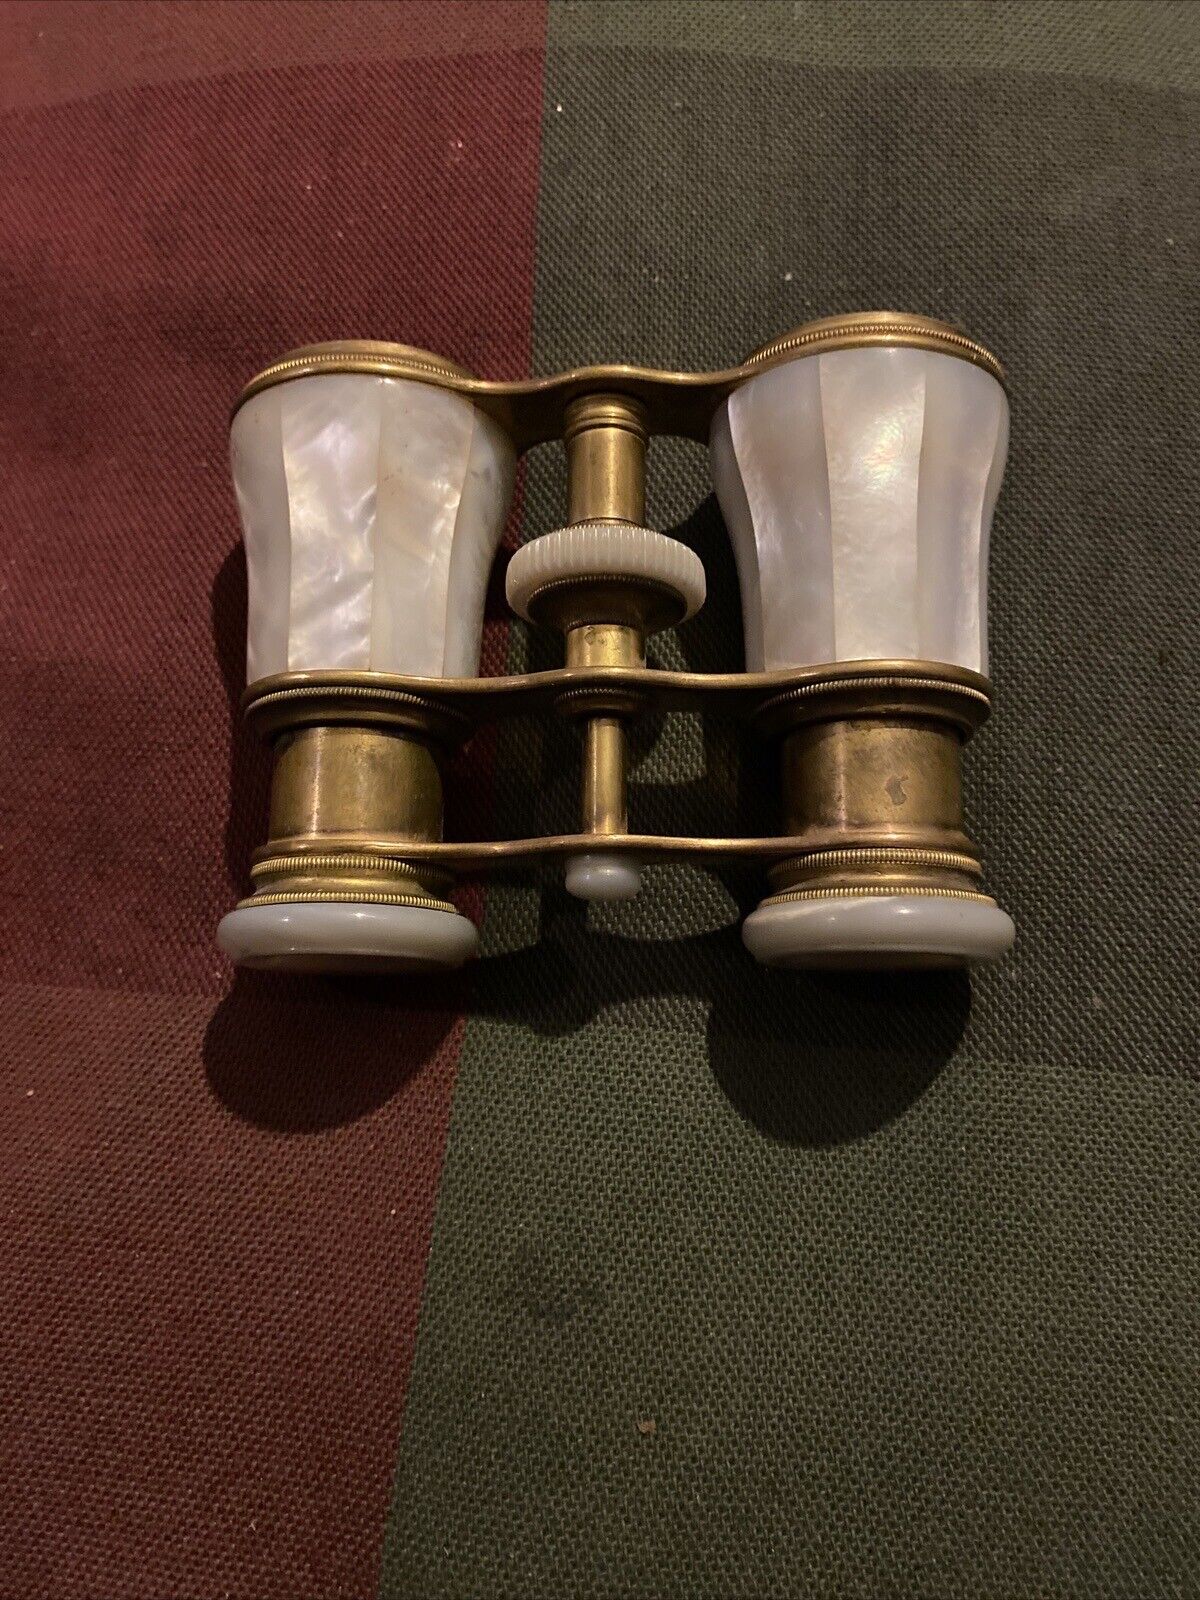 E.E.Bausch & Son Vintage Opera Glasses Mother of Pearl  1850--1900 Era Very Nice